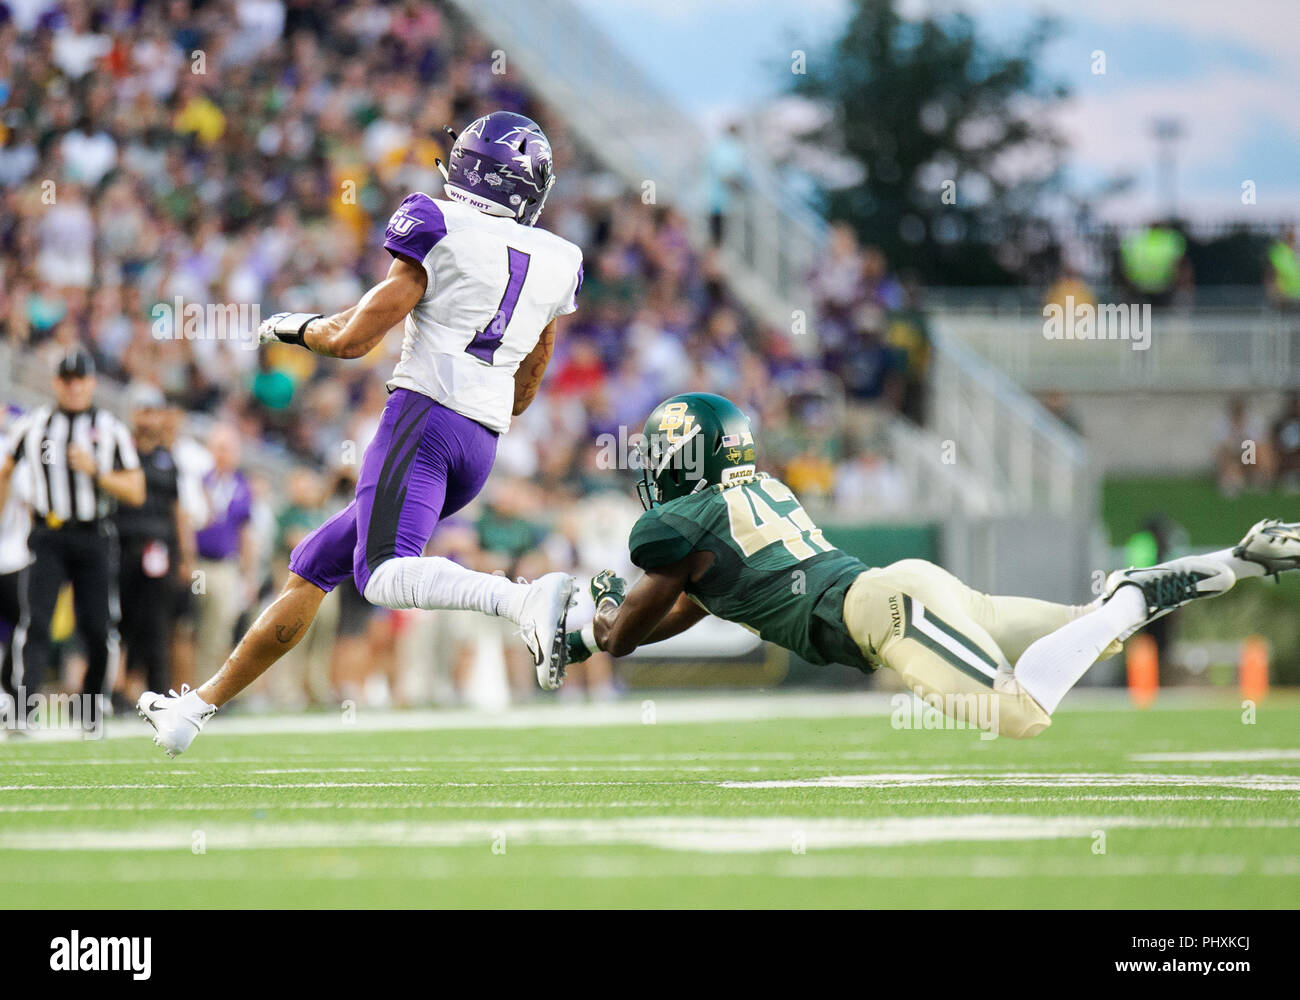 Waco, Texas, USA. 1st Sep, 2018. Baylor Bears safety Jairon McVea (42) tries to tackle Abilene Christian Wildcats wide receiver D.J. Fuller (1) during the 1st half of the NCAA Football game between the Abilene Christian Wildcats and Baylor Bears at McLane Stadium in Waco, Texas. Matthew Lynch/CSM/Alamy Live News Stock Photo